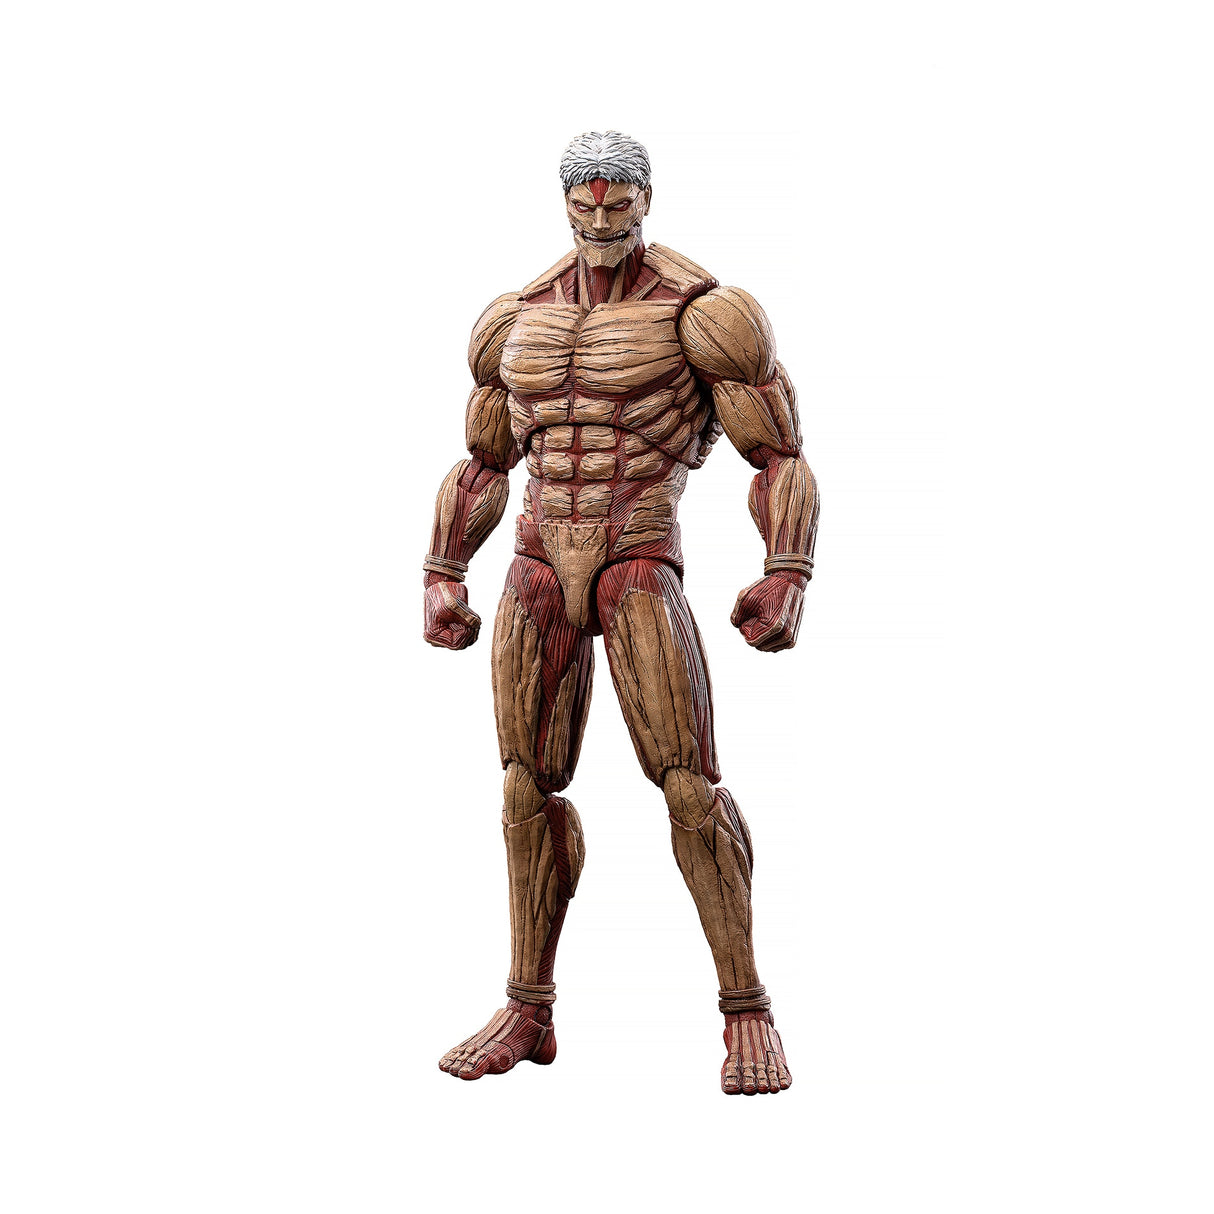 18Cm 1/12 Coser Toys Attack On Titan The Armored Titan Reiner Braun Anime Action Figure Garage Kit Soldiers Model Toys Gift, everythinganimee